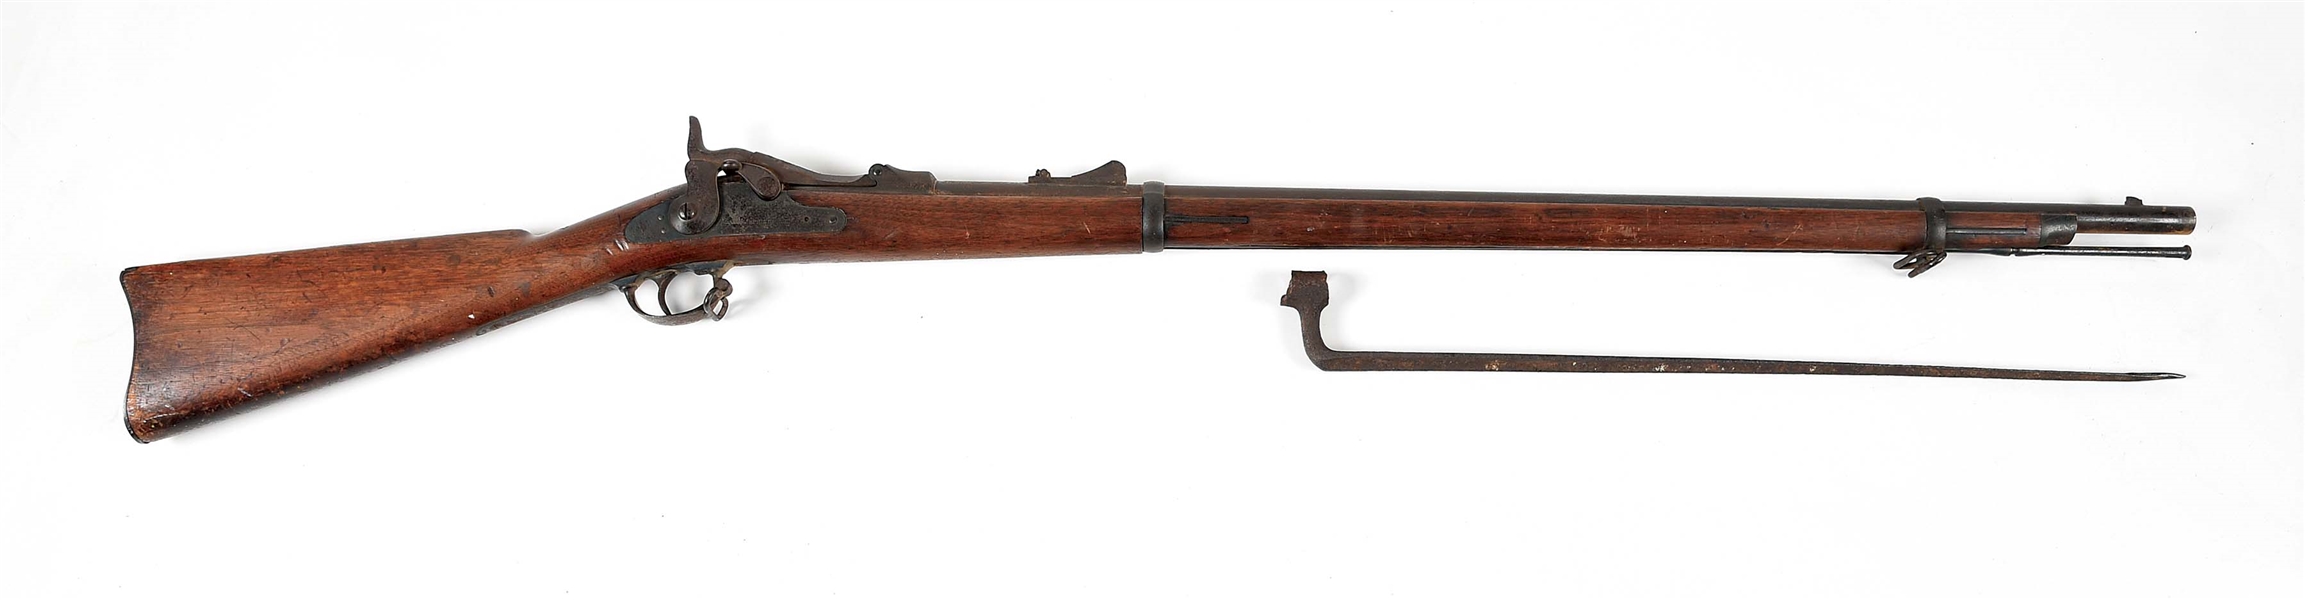 (A) SPRINGFIELD TRAPDOOR RIFLE WITH RELIC BAYONET